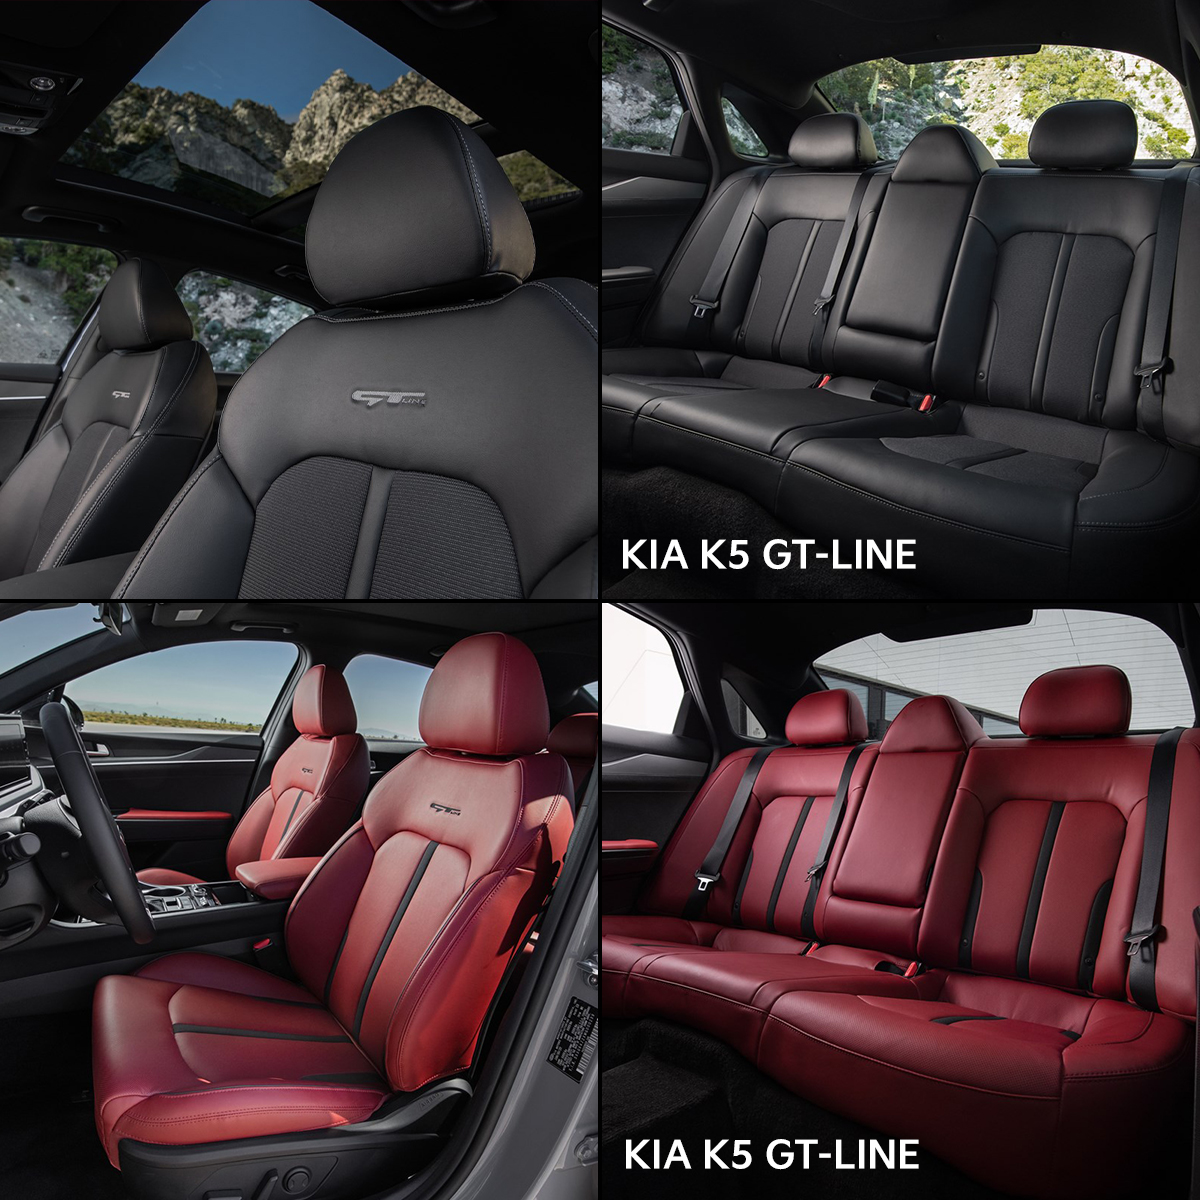 When it comes to the interior of your 2024 #Kia #K5 GT-Line, would you opt for the sleek sophistication of Black Leather or the bold statement of Red Leather? Let us know in the comments.

#youpick #kiak5 #shopuslast #newkia